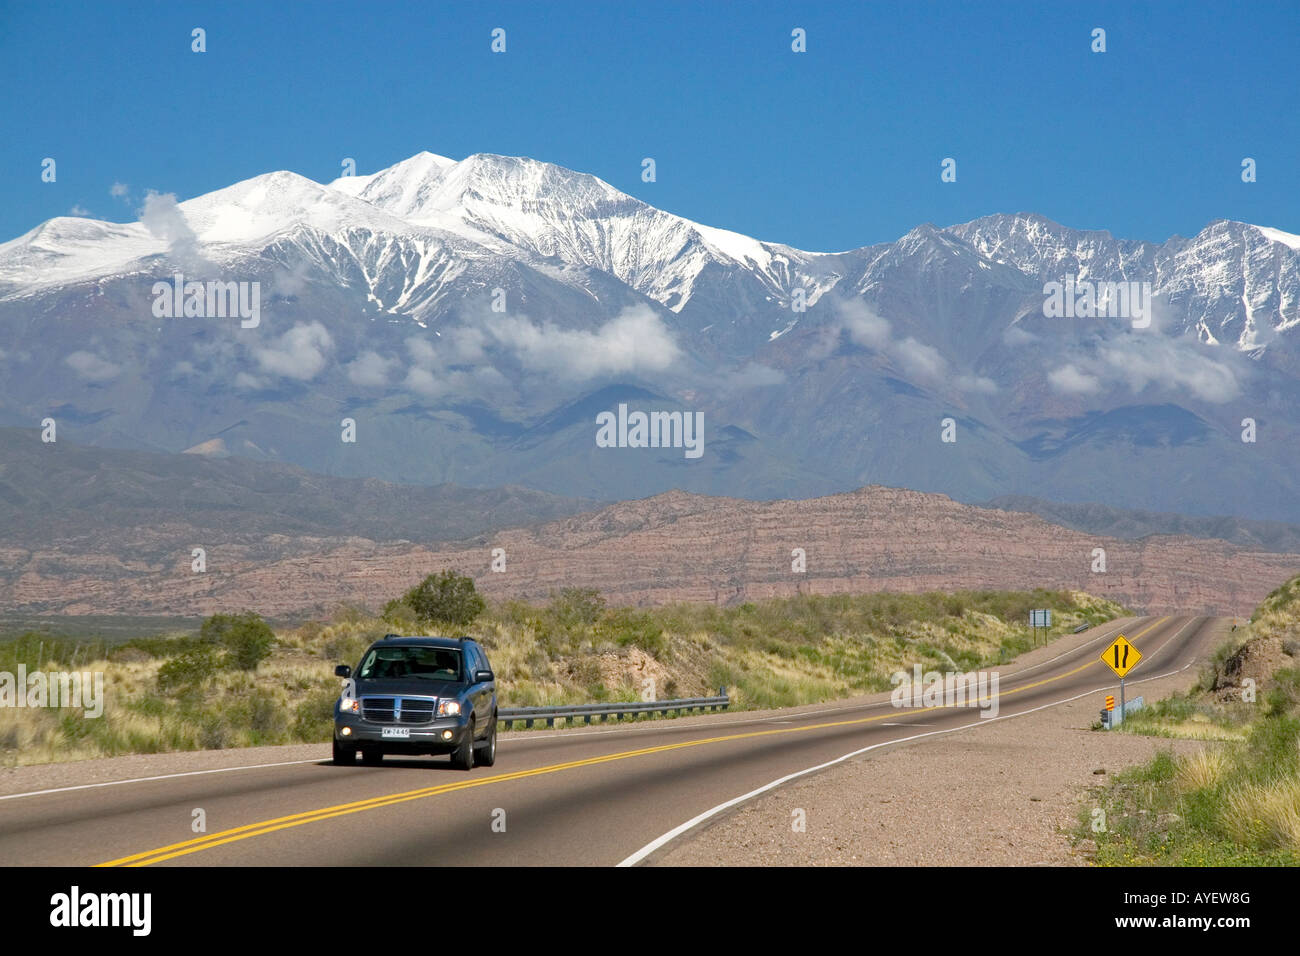 A view of the Andes Mountain Range with traffic on highway 7 near Mendoza Argentina Stock Photo